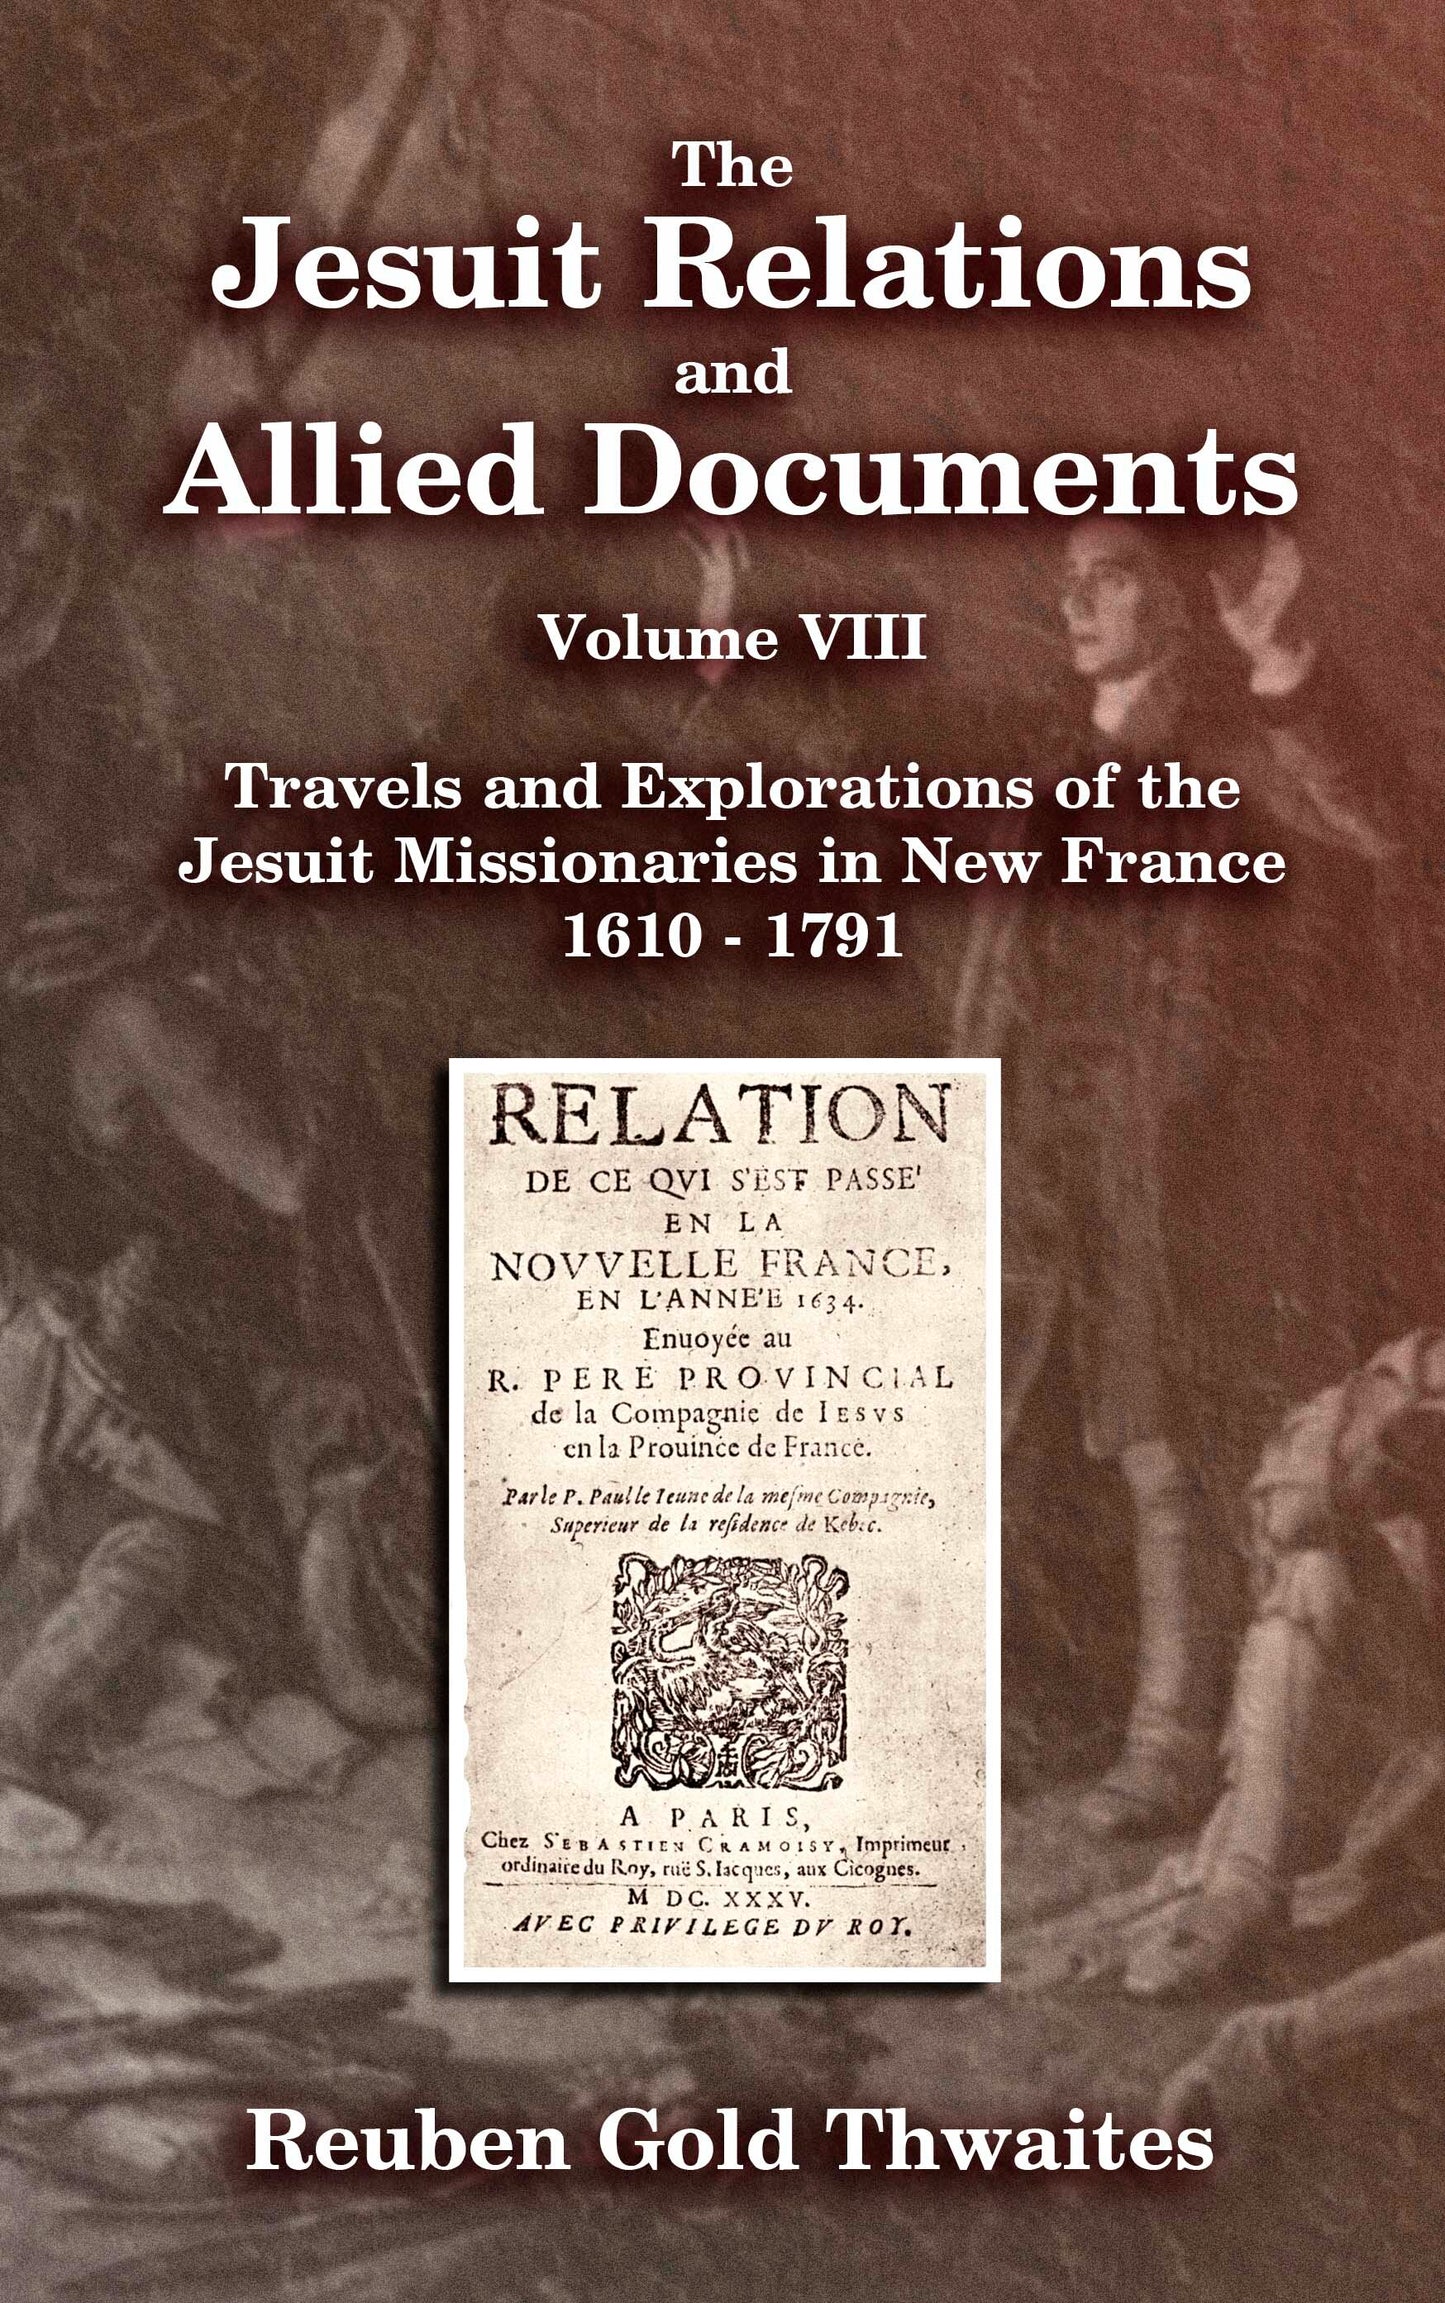 The Jesuit Relations and Allied Documents, Travels and Explorations of the Jesuit Missionaries in New France 1610 - 1791 Volume VIII